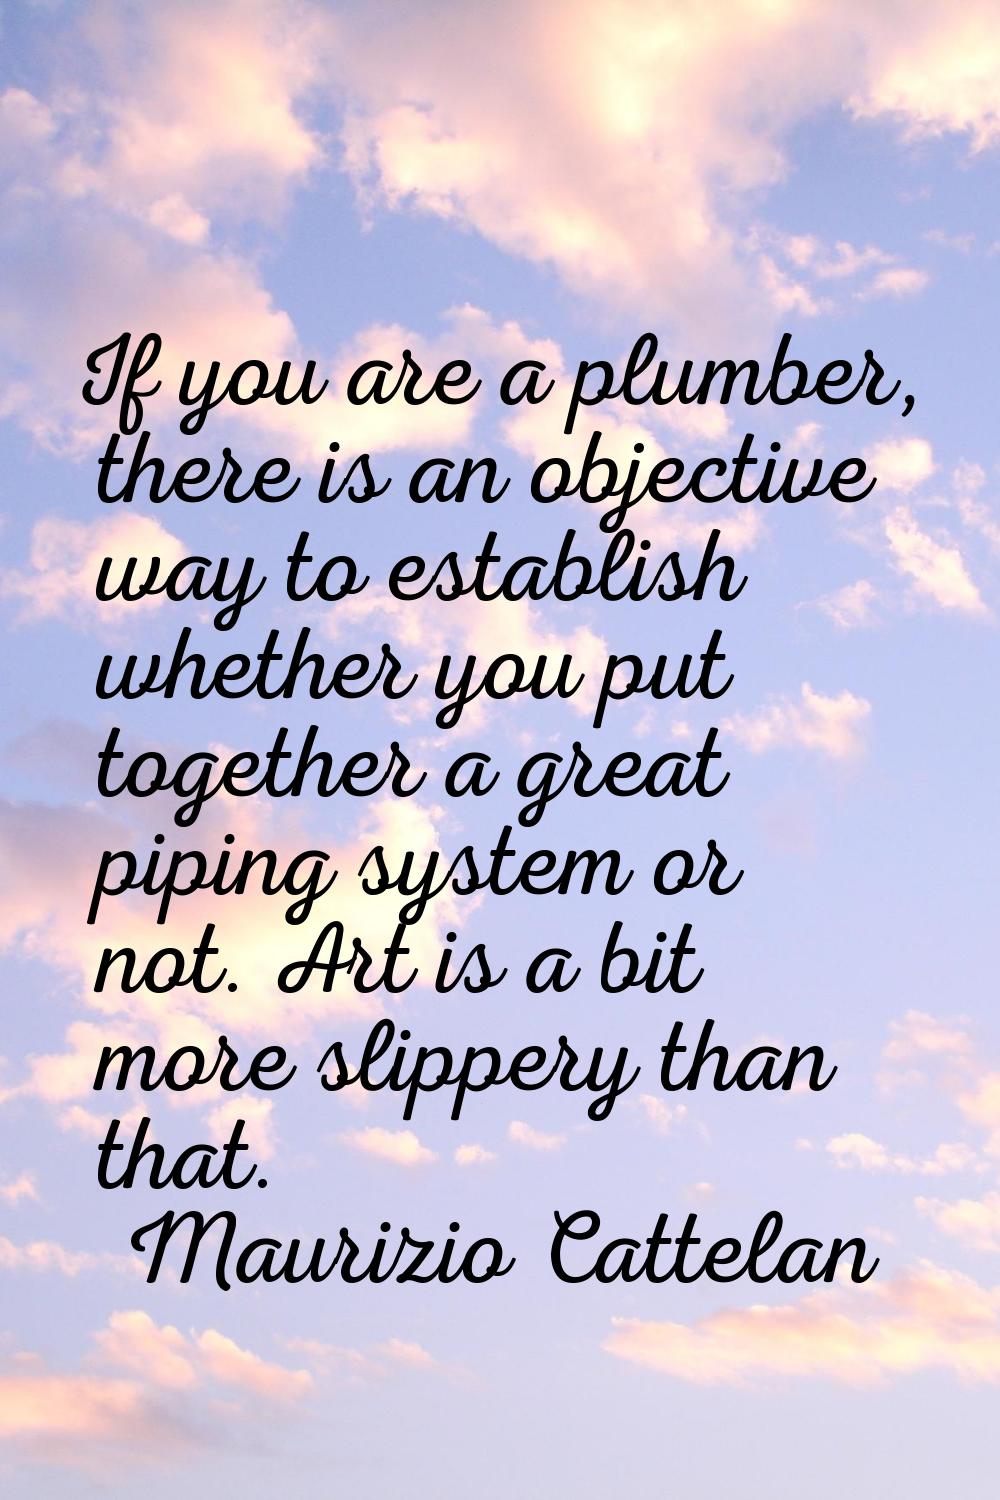 If you are a plumber, there is an objective way to establish whether you put together a great pipin